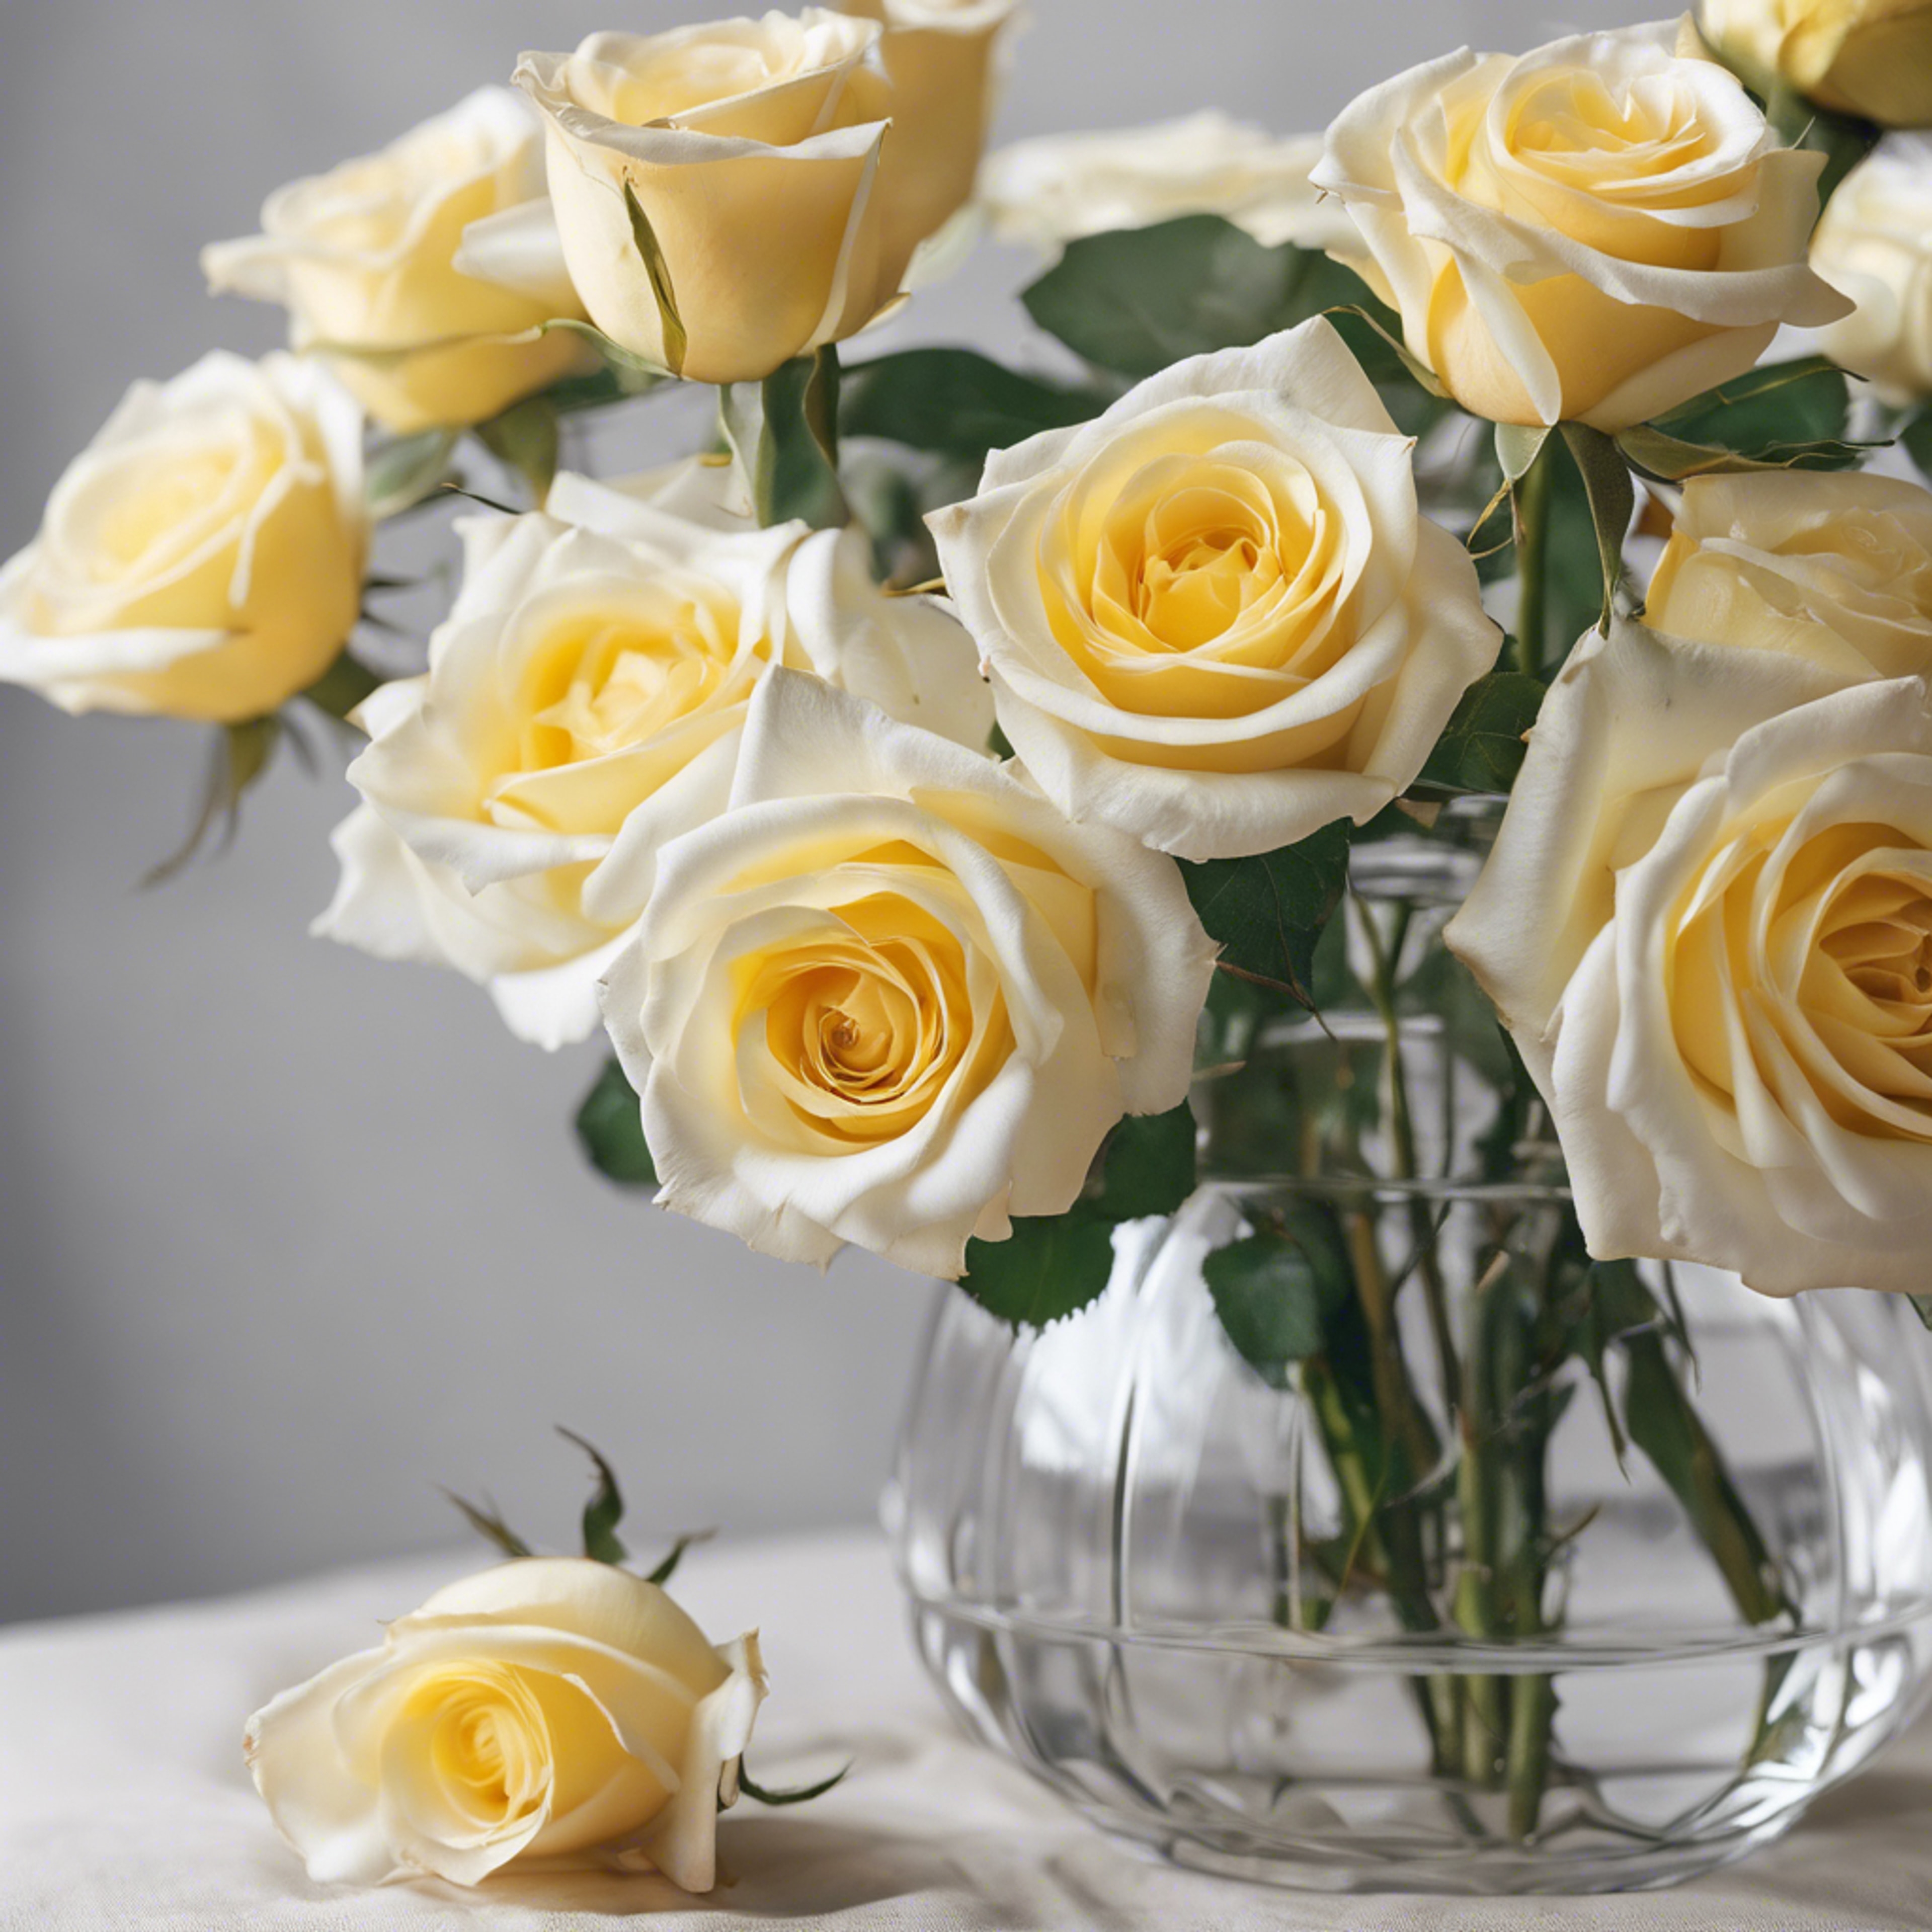 A beautiful array of luminescent white and yellow roses in a crystal clear vase. Обои[29c0e485a0b1412795b9]